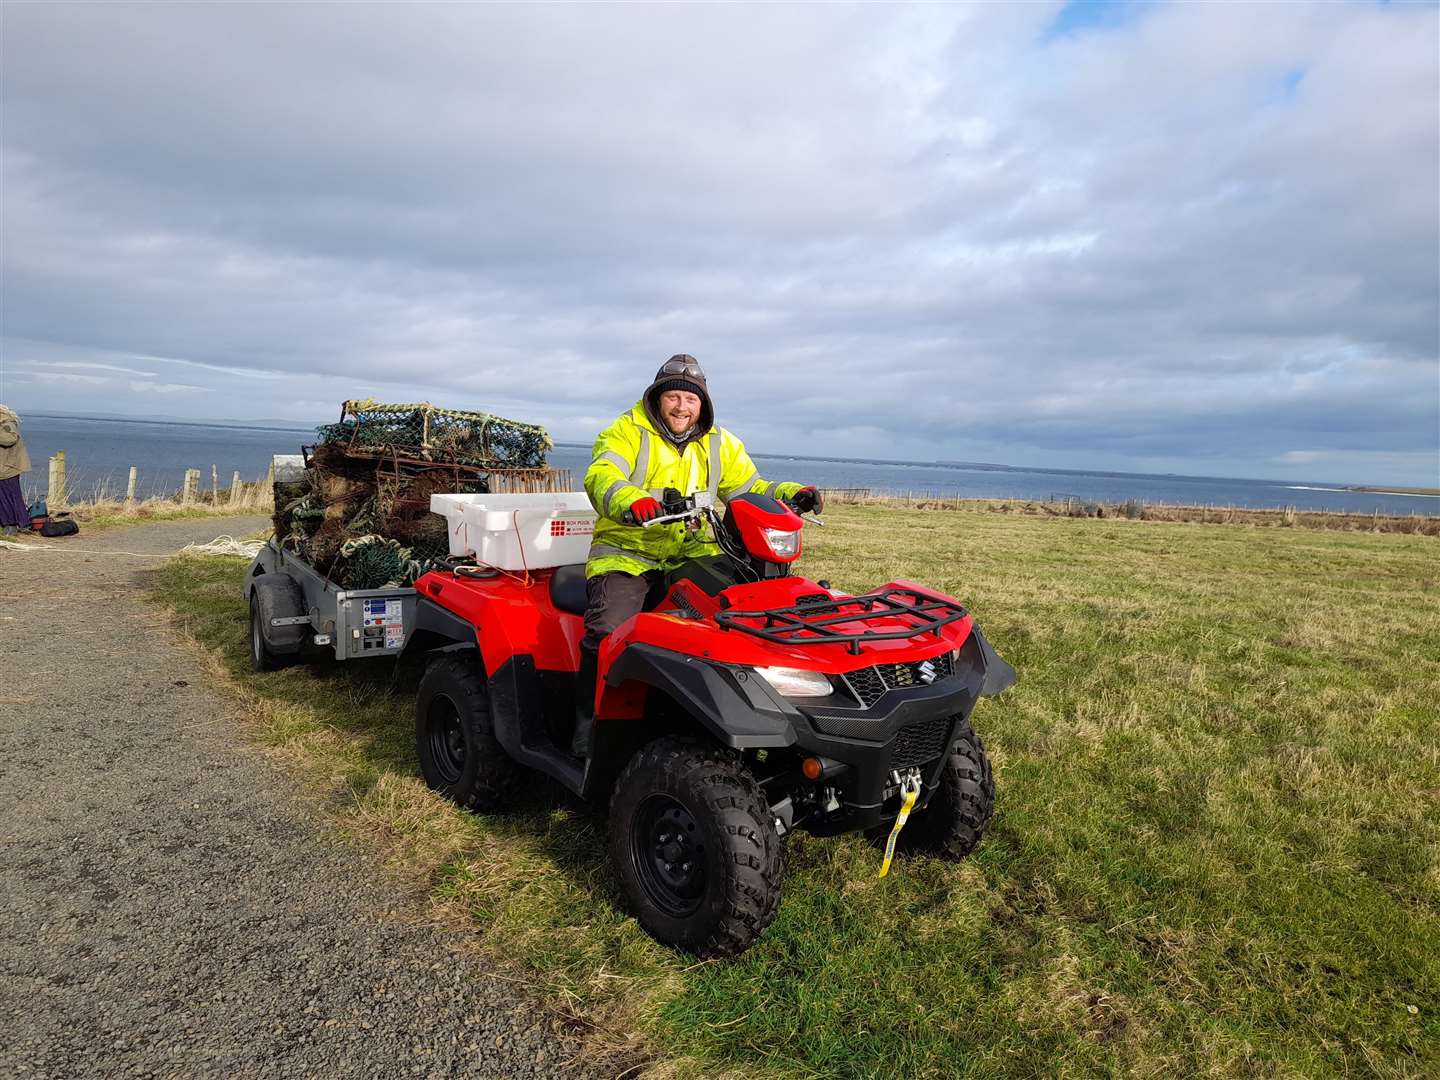 A quad bike is an invaluable tool in helping remove the coastal debris.